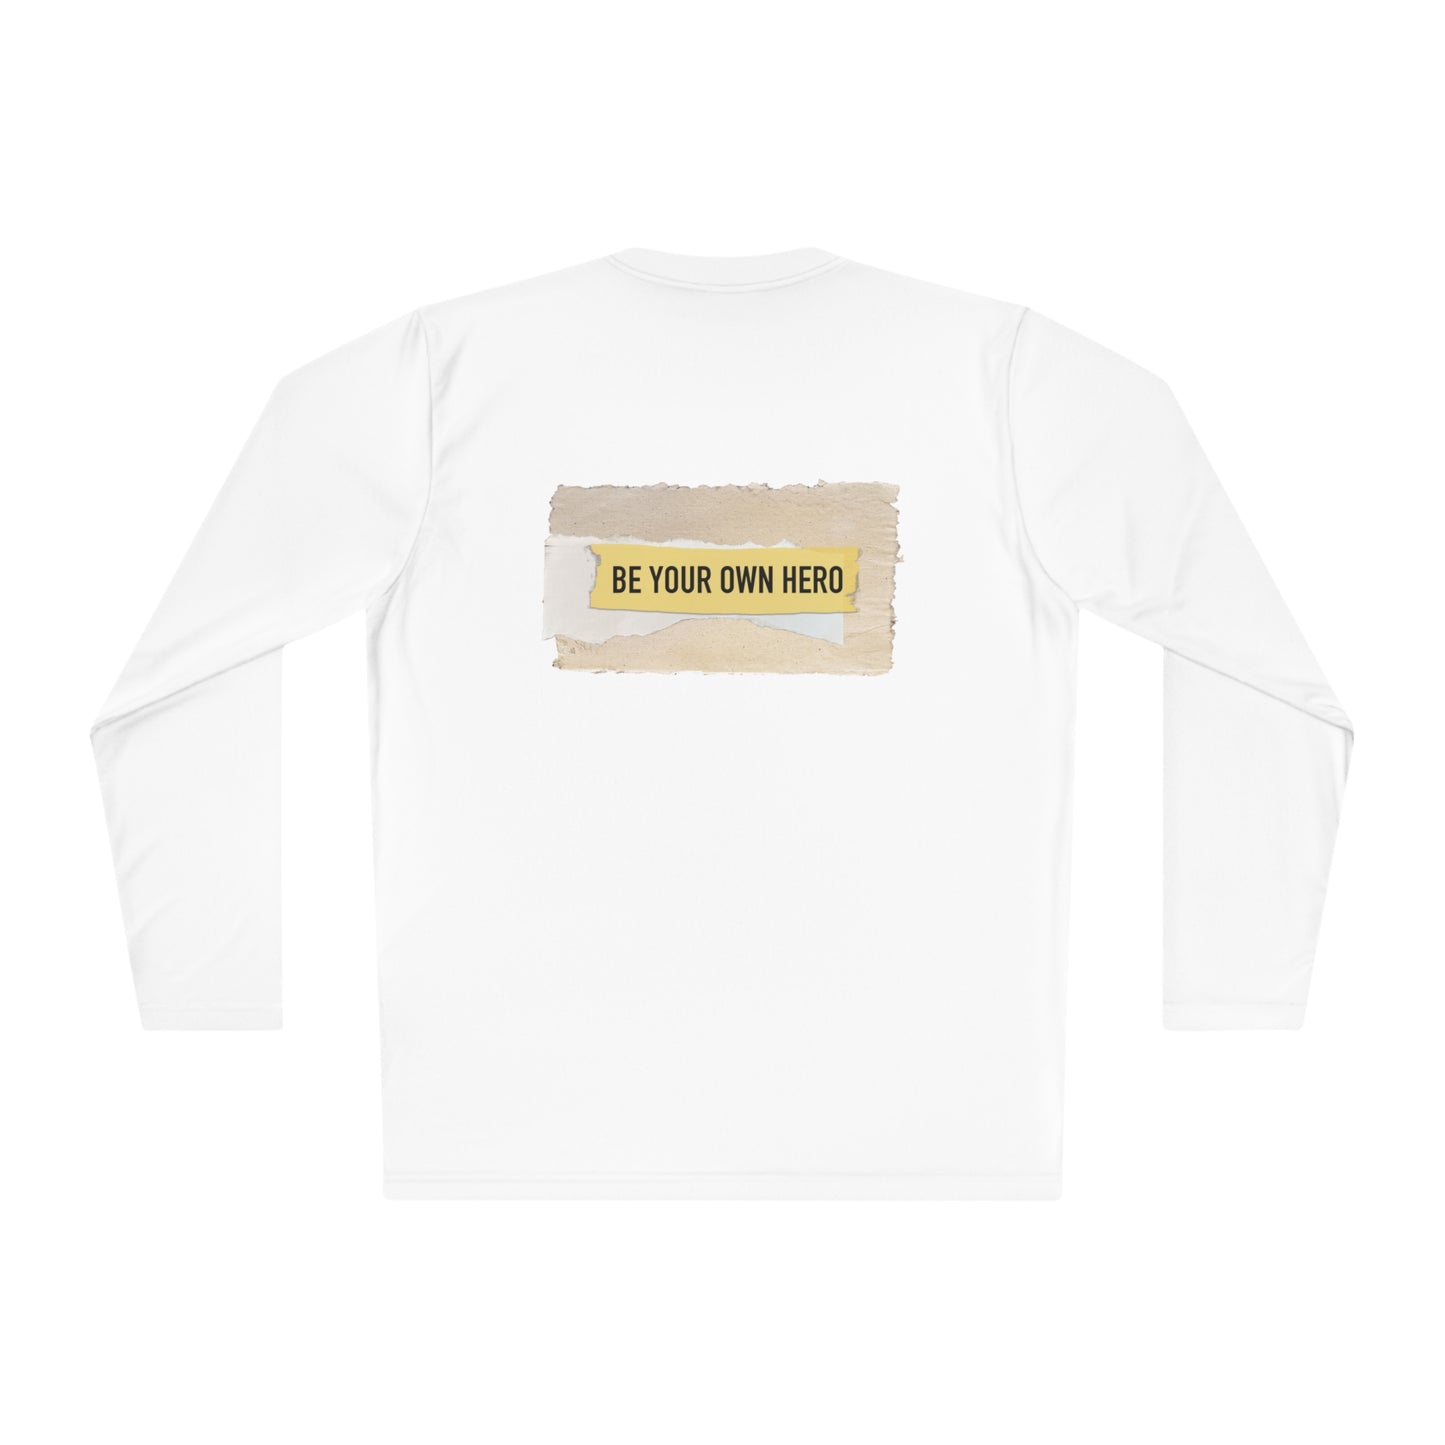 Be Your Own Hero Long Sleeve